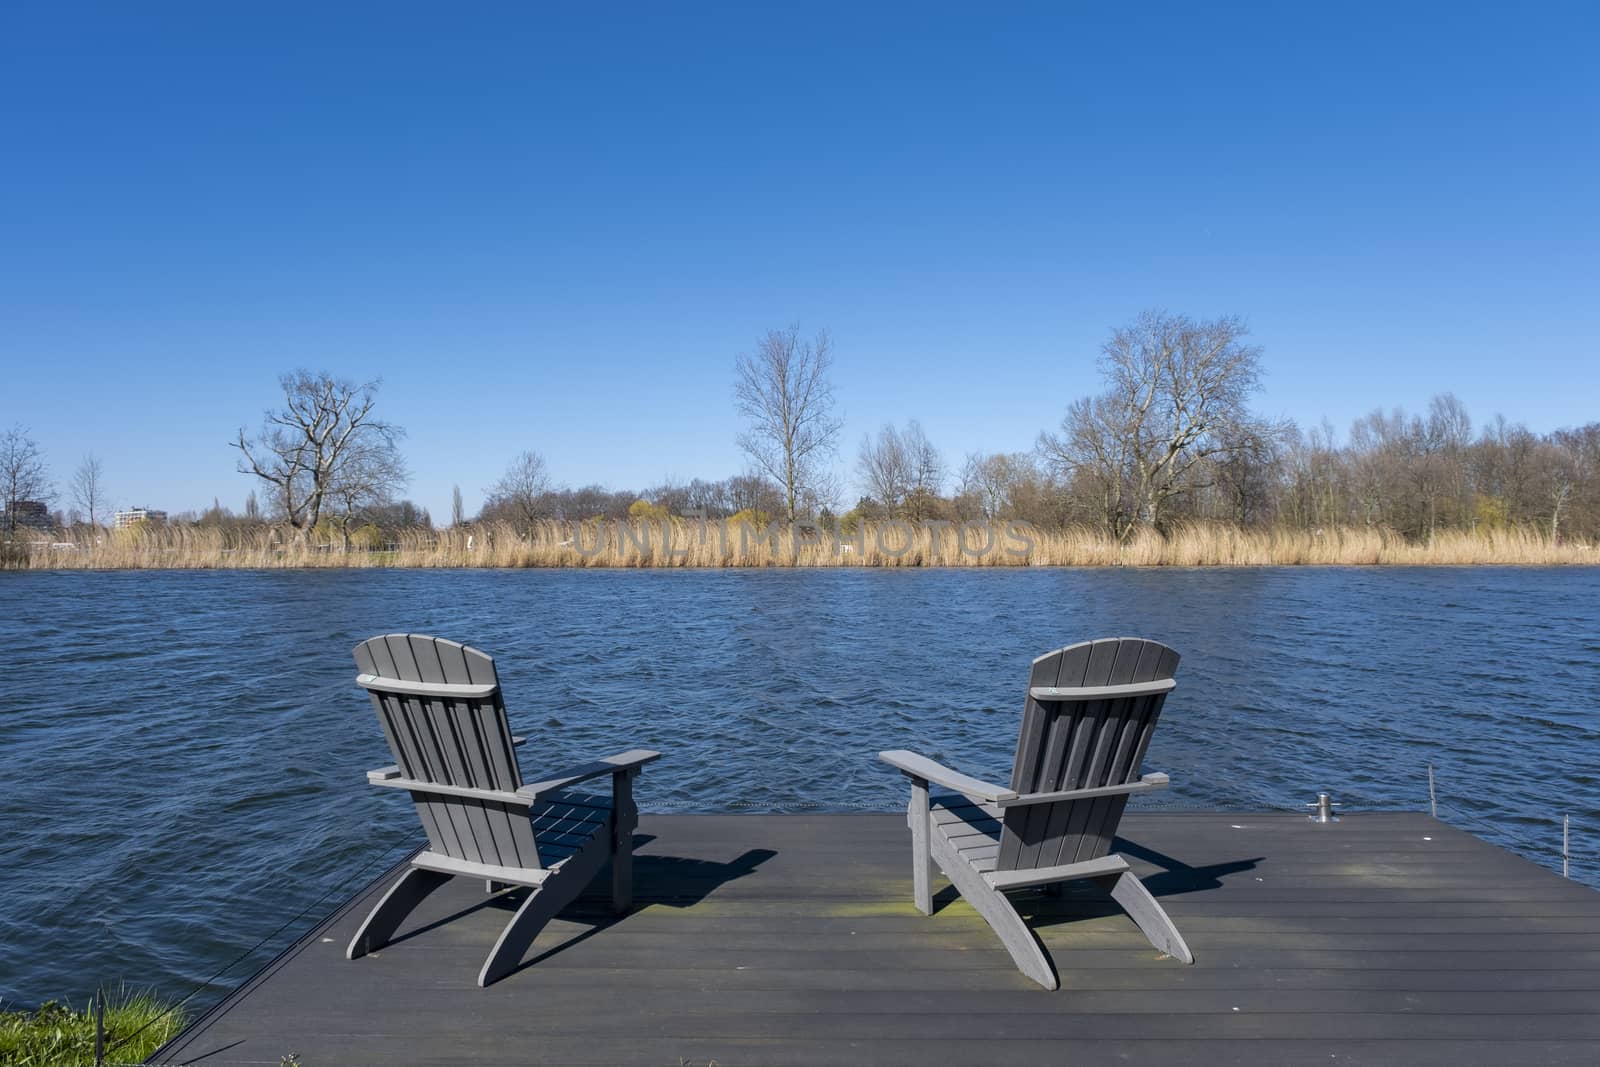 Rustic hand crafted chairs on a wooden deck overlooking a river  by Tjeerdkruse